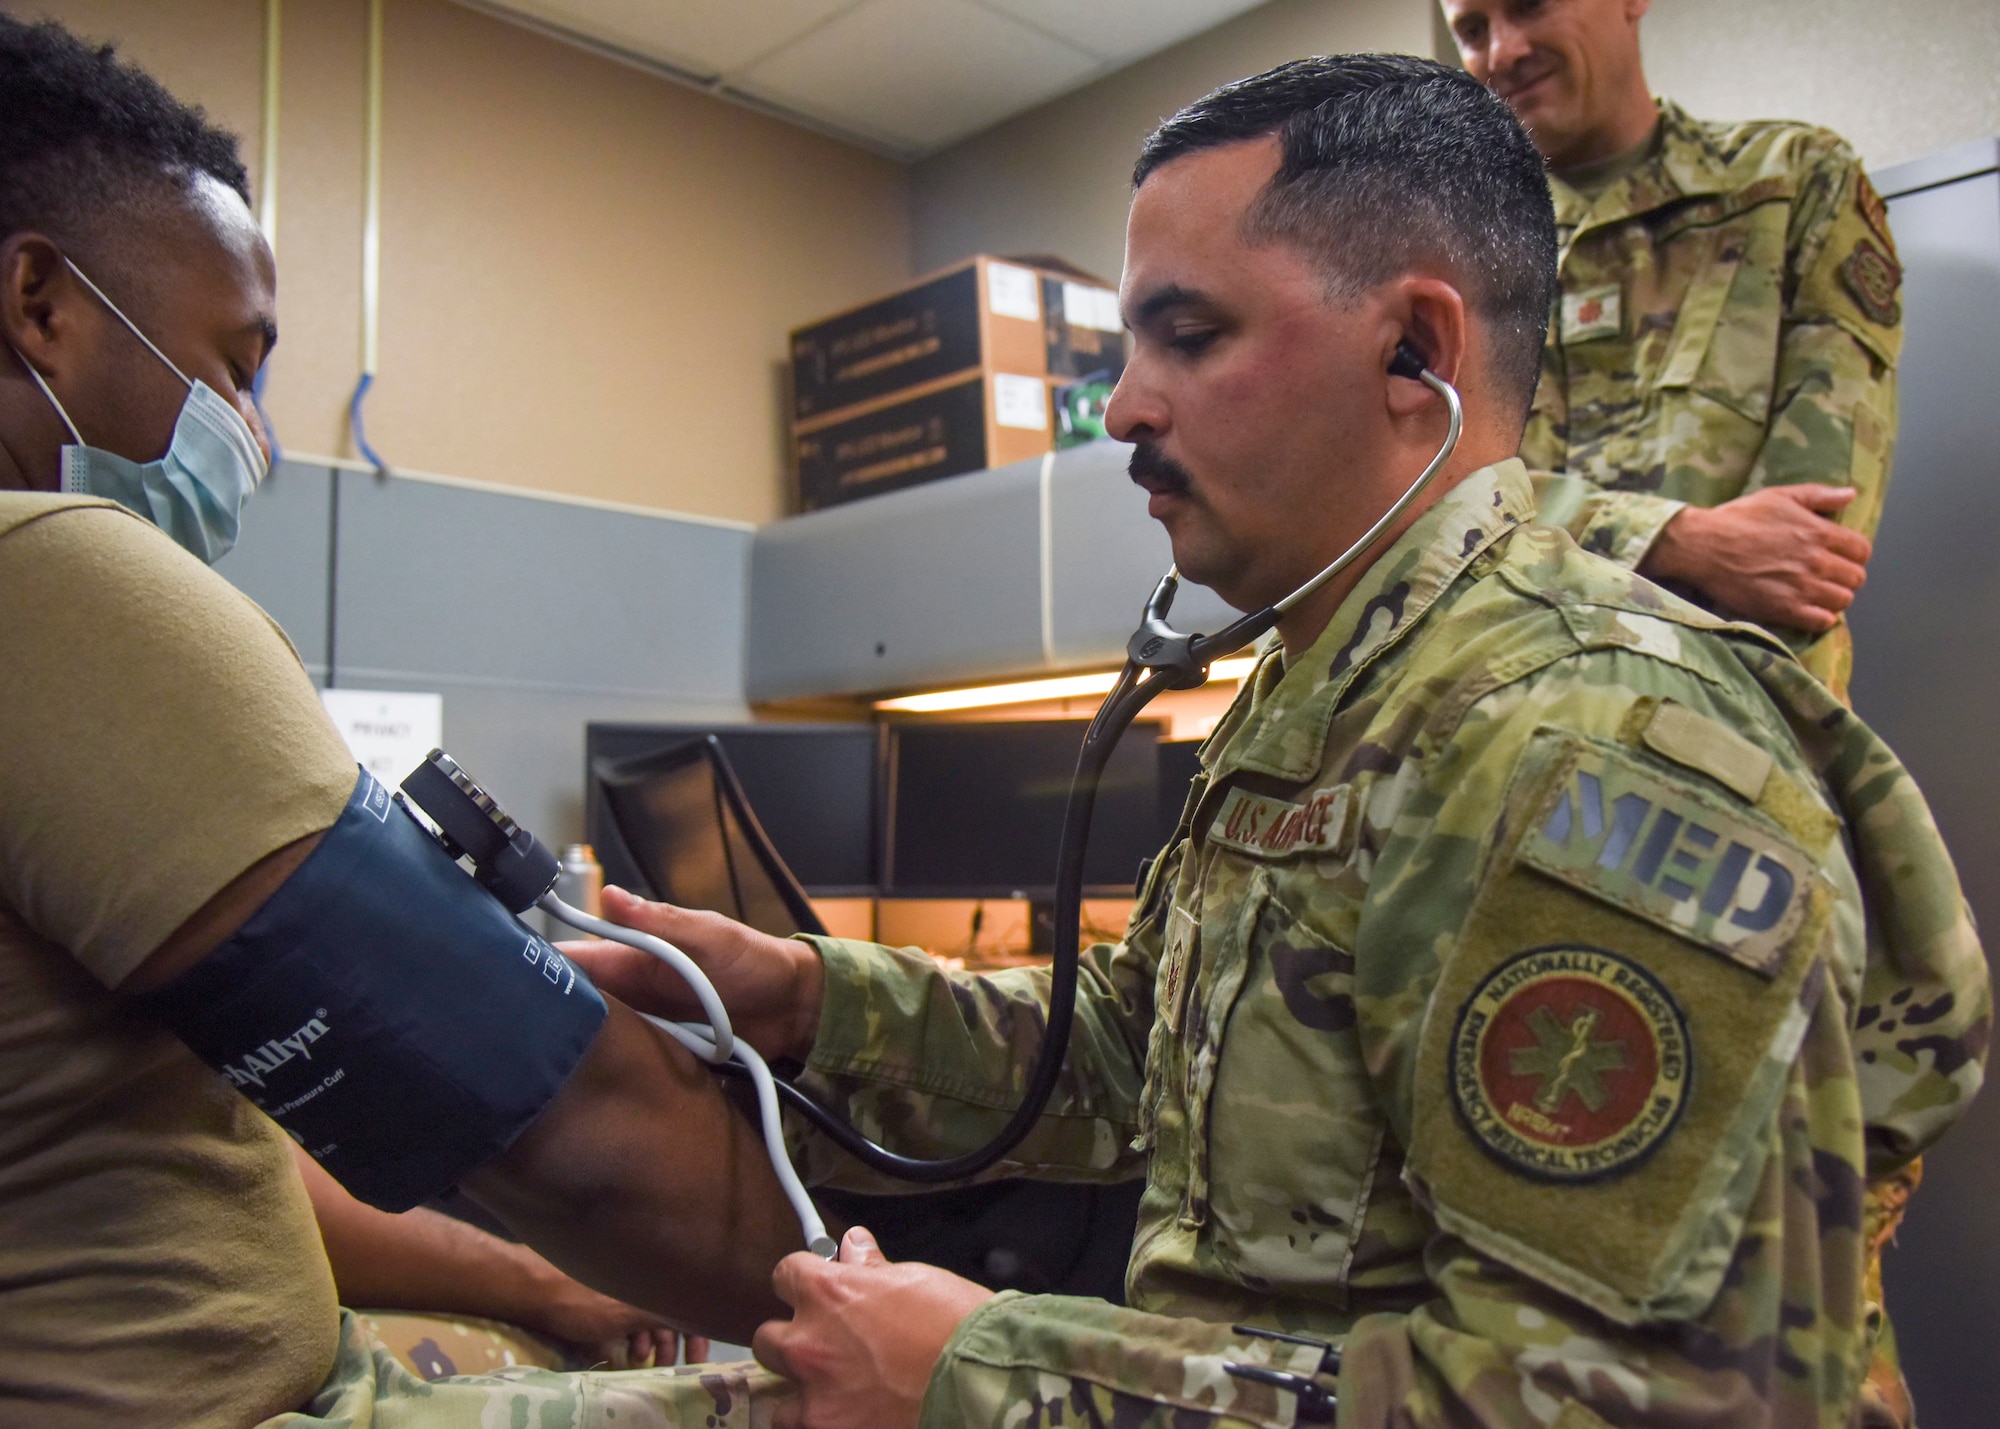 U.S. Air Force Tech Sgt. Daniel Beauchamp 912th Air Refueling Squadron flight and operational medicine technician, takes a patient's vital signs at March Air Force Reserve, California, July 15, 2021.